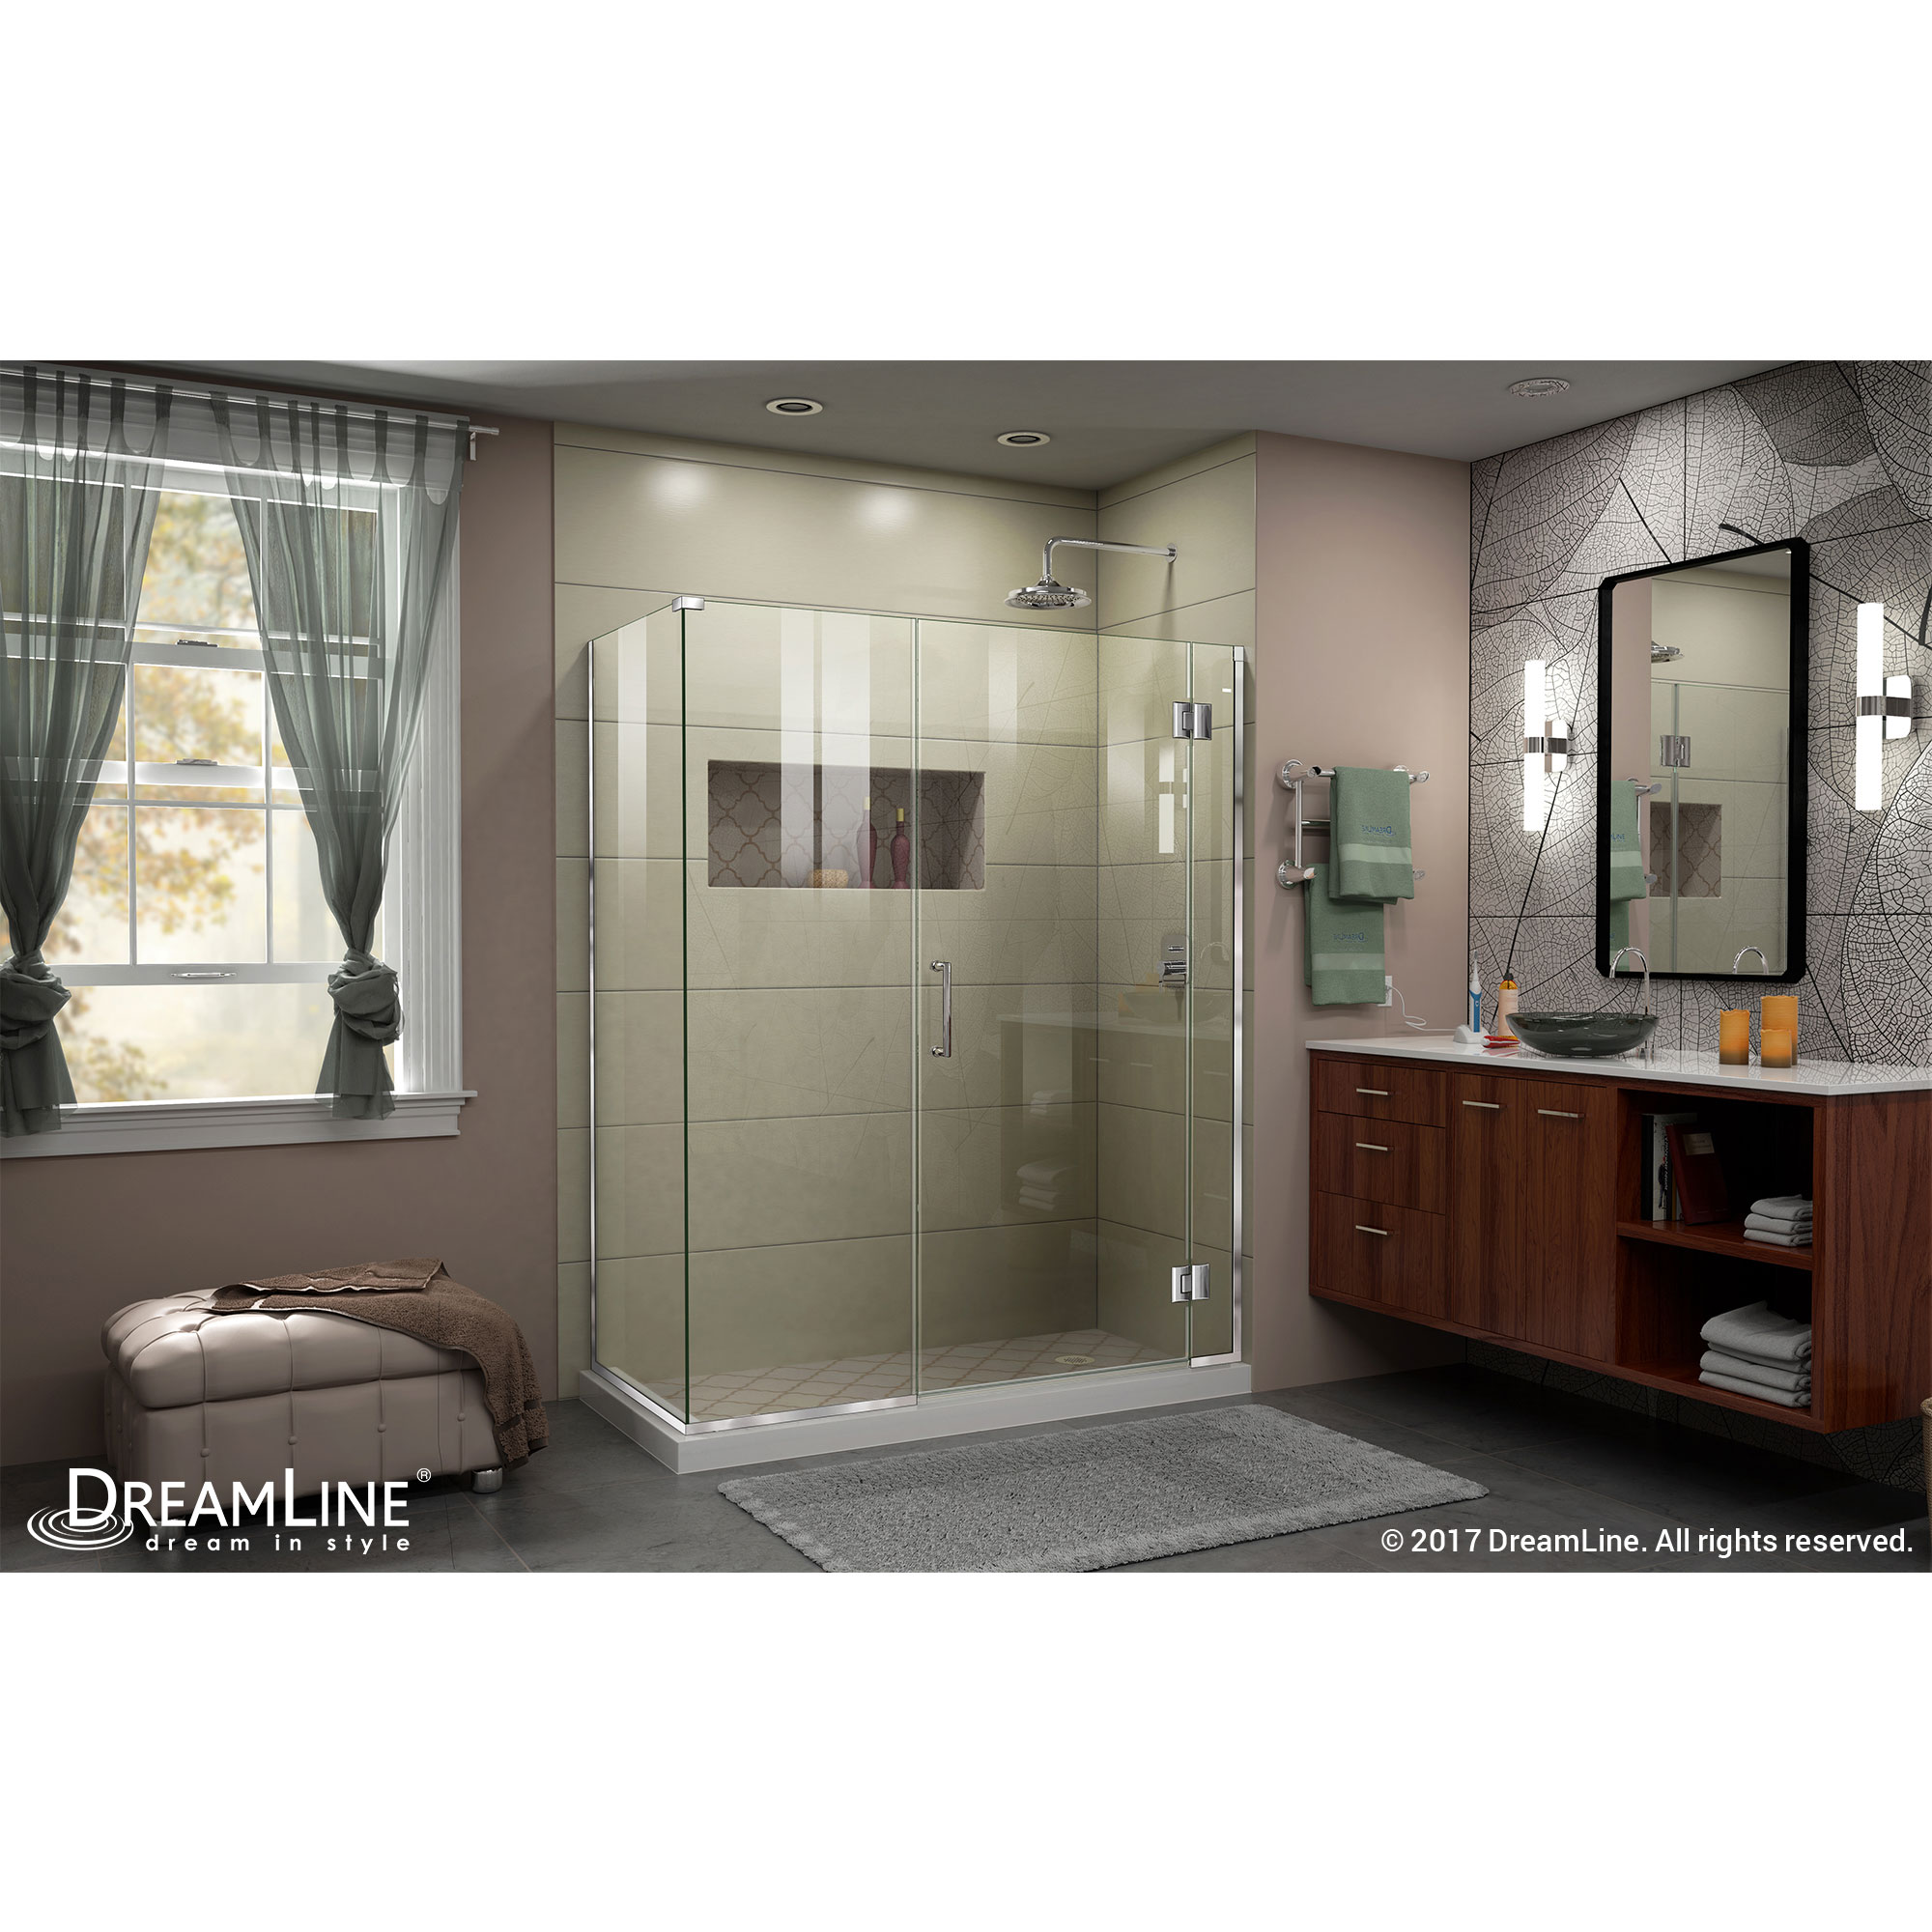 DreamLine Unidoor-X 46 in. W x 34 3/8 in. D x 72 in. H Hinged Shower Enclosure in Chrome